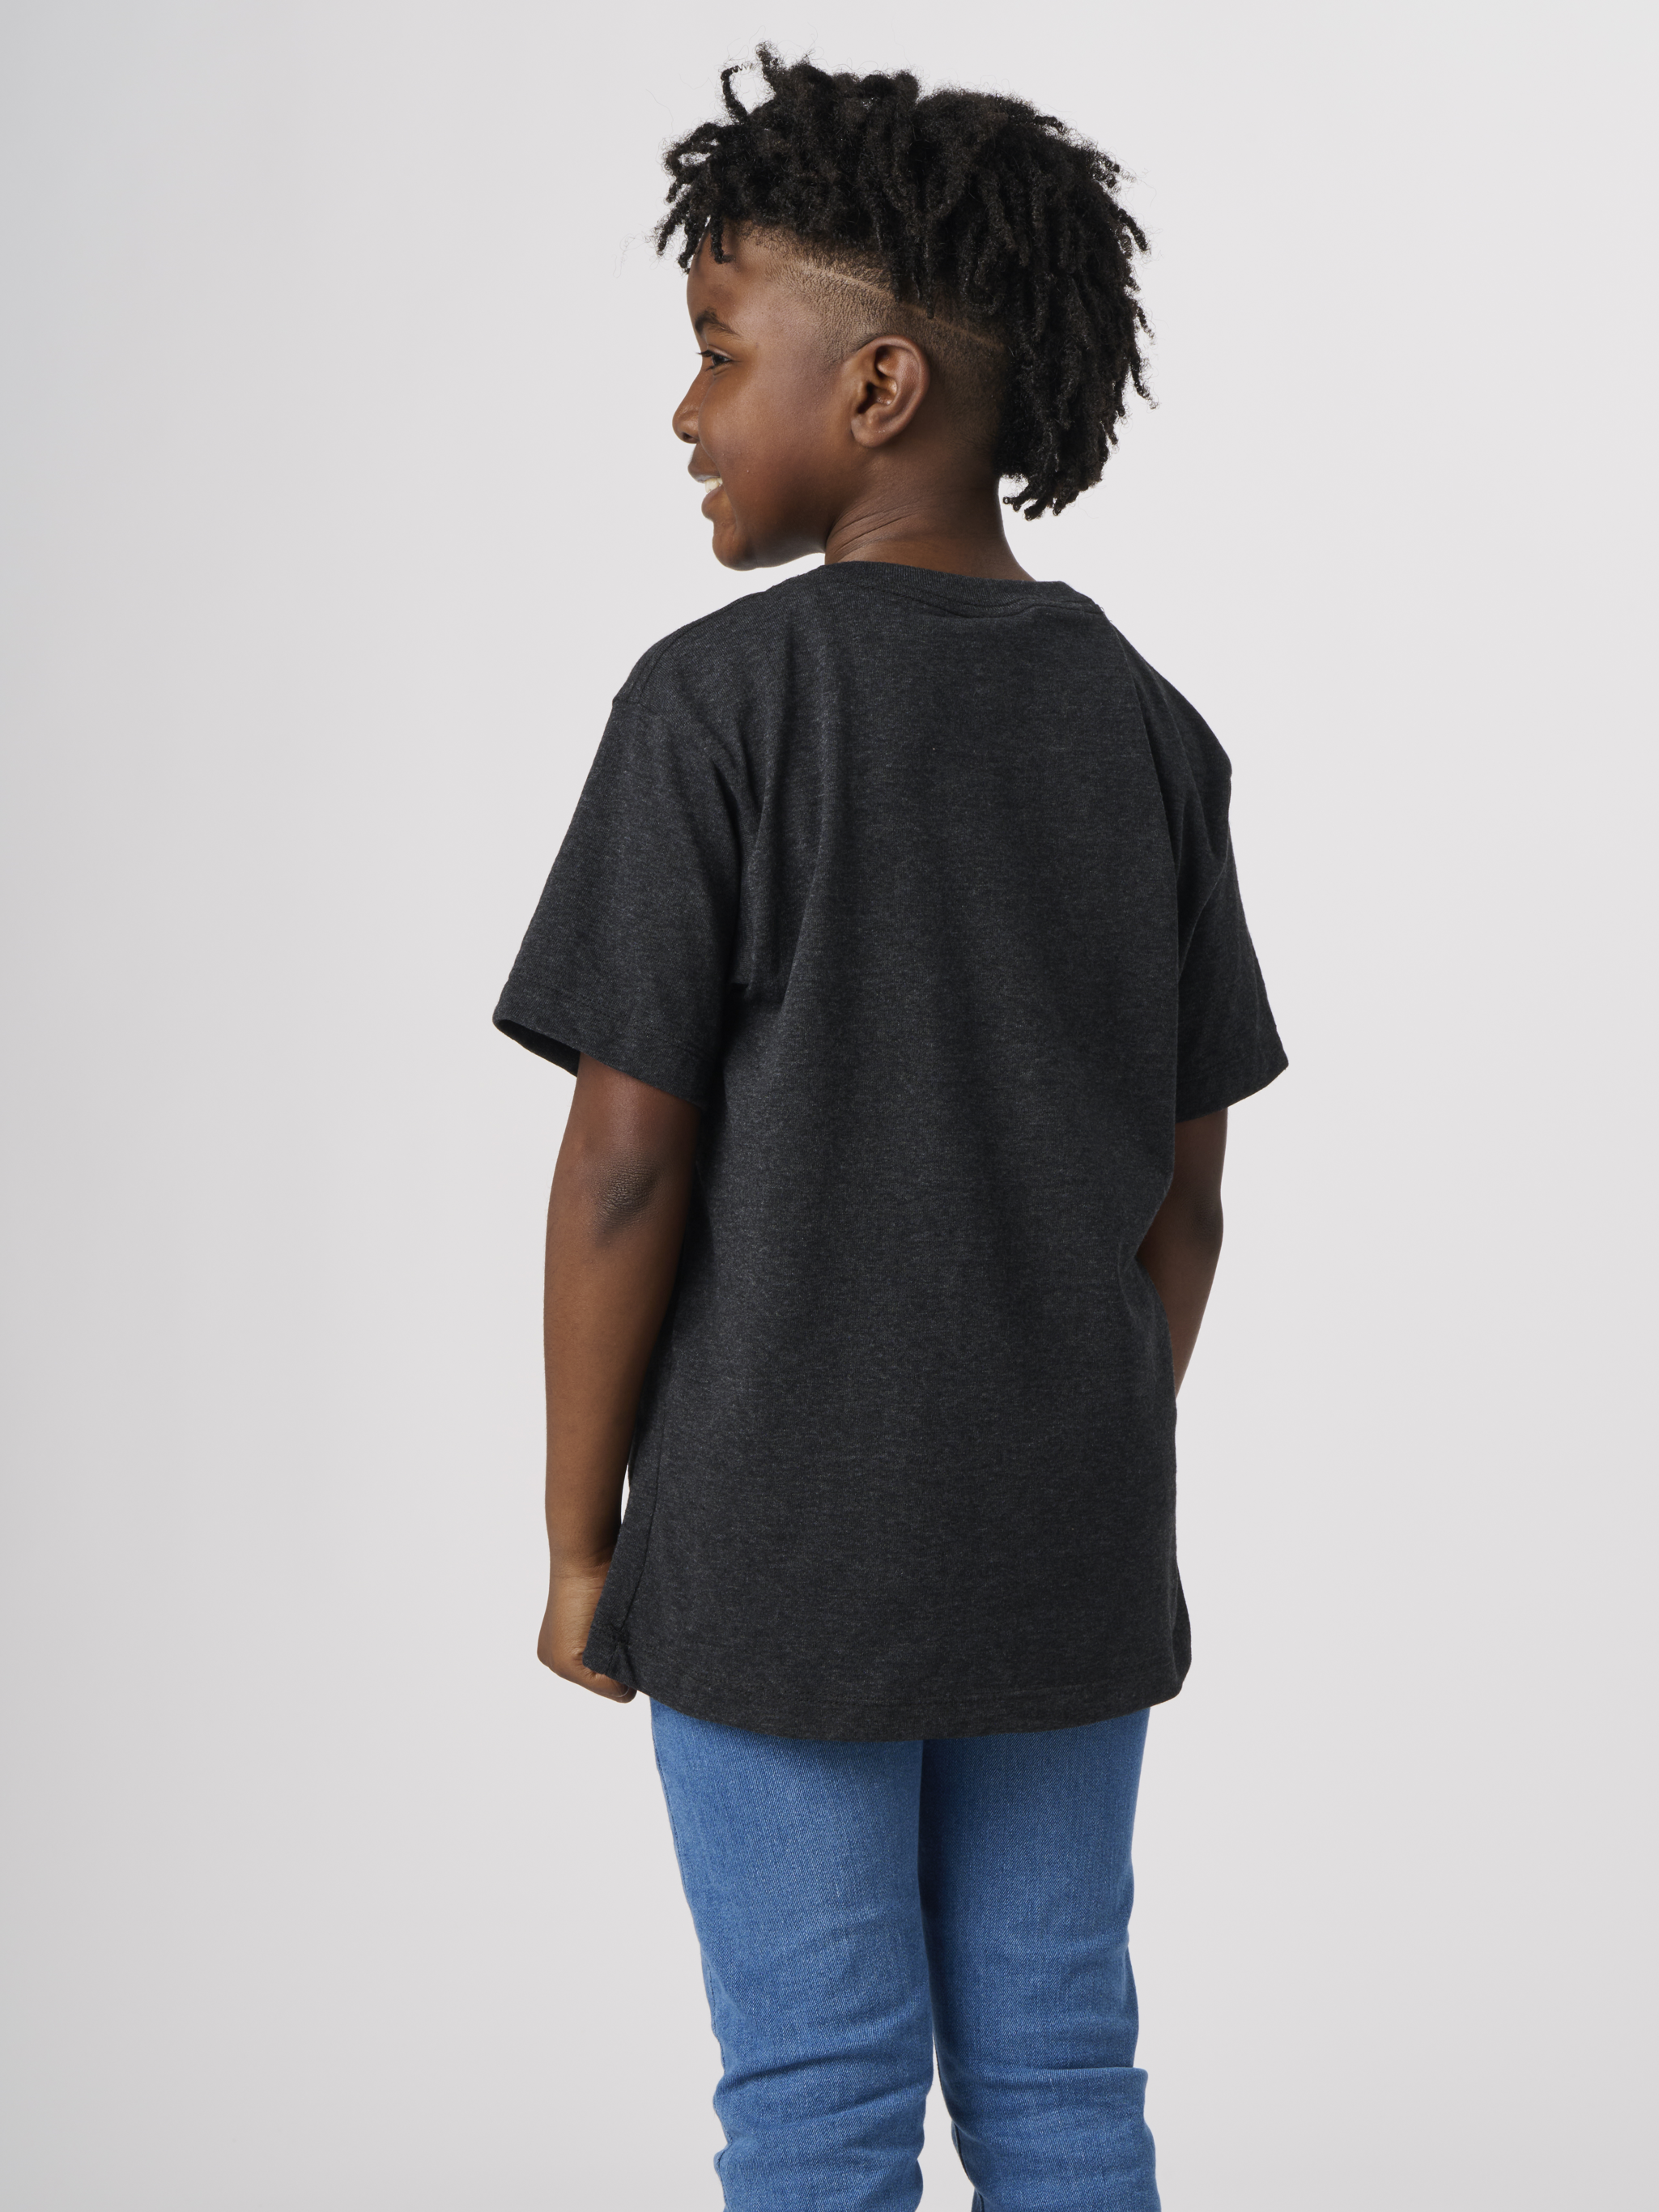 RECOVER_RY100_YOUTHCLASSICSHORTSLEEVETSHIRT_CARBON_BACK.png